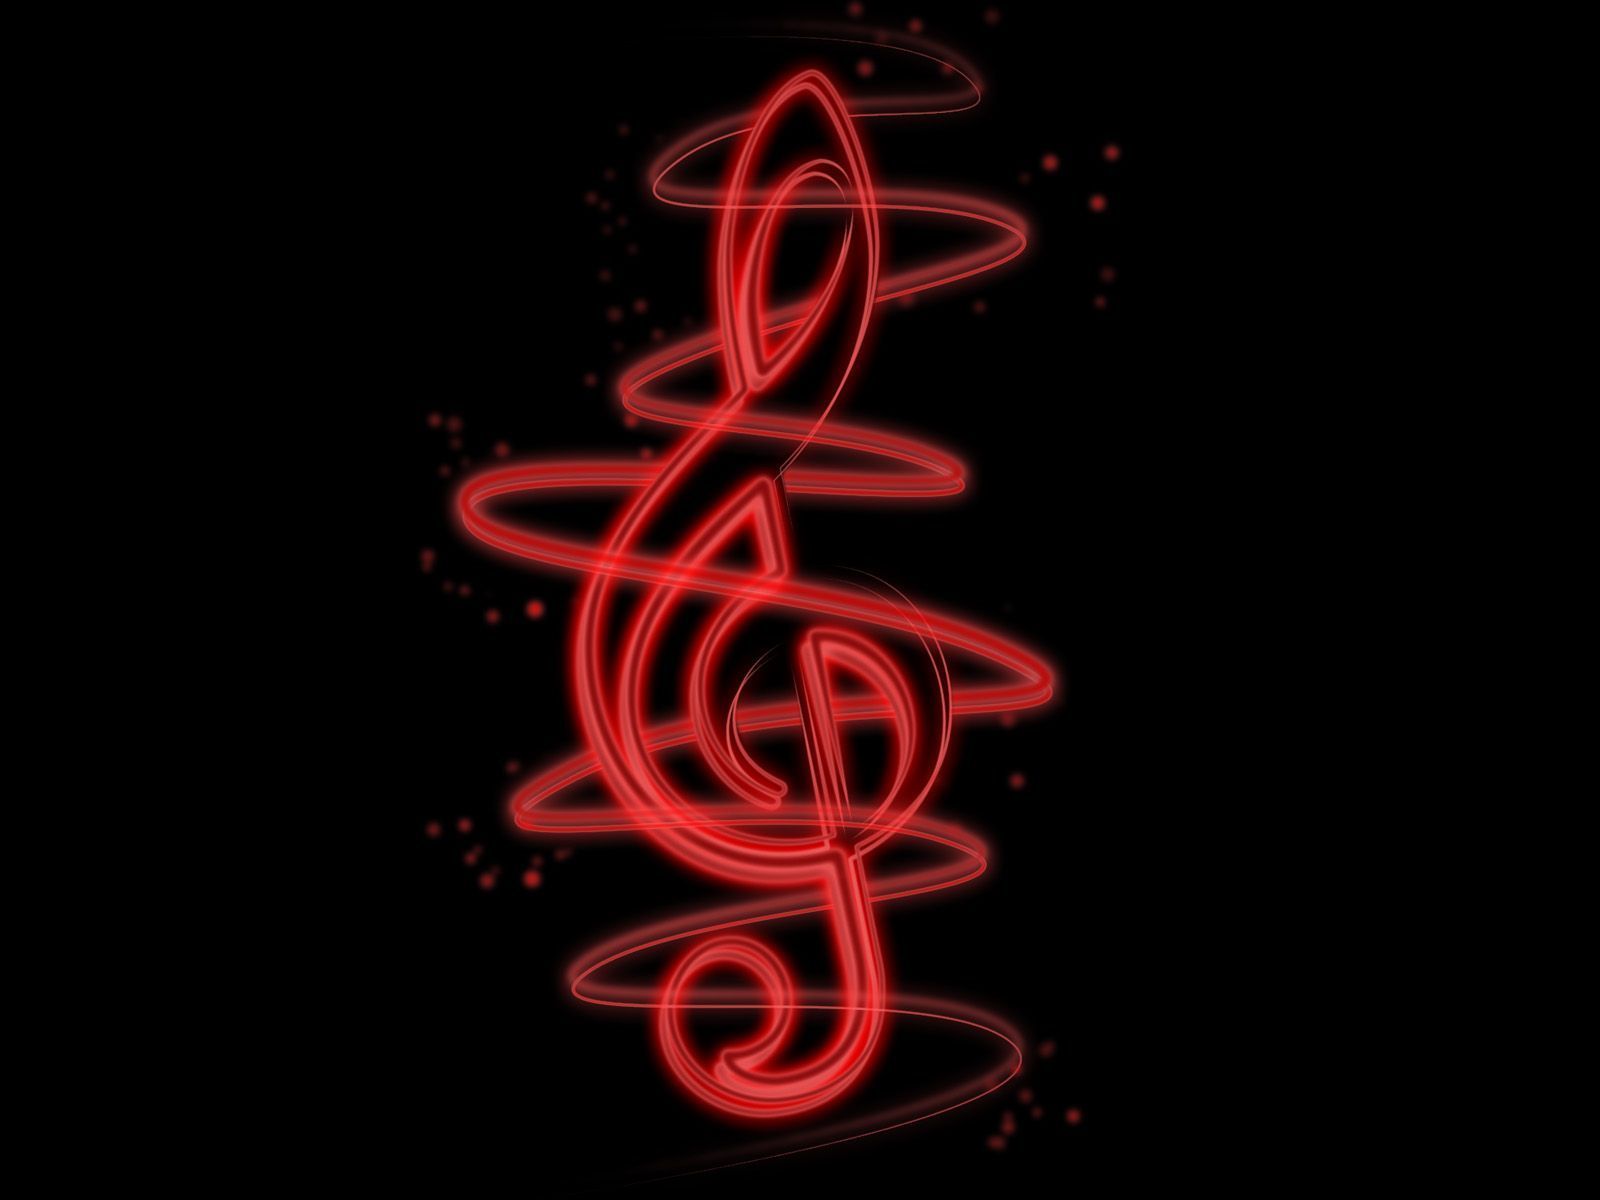 Wallpaper Treble clef Red and Black Backgrounds